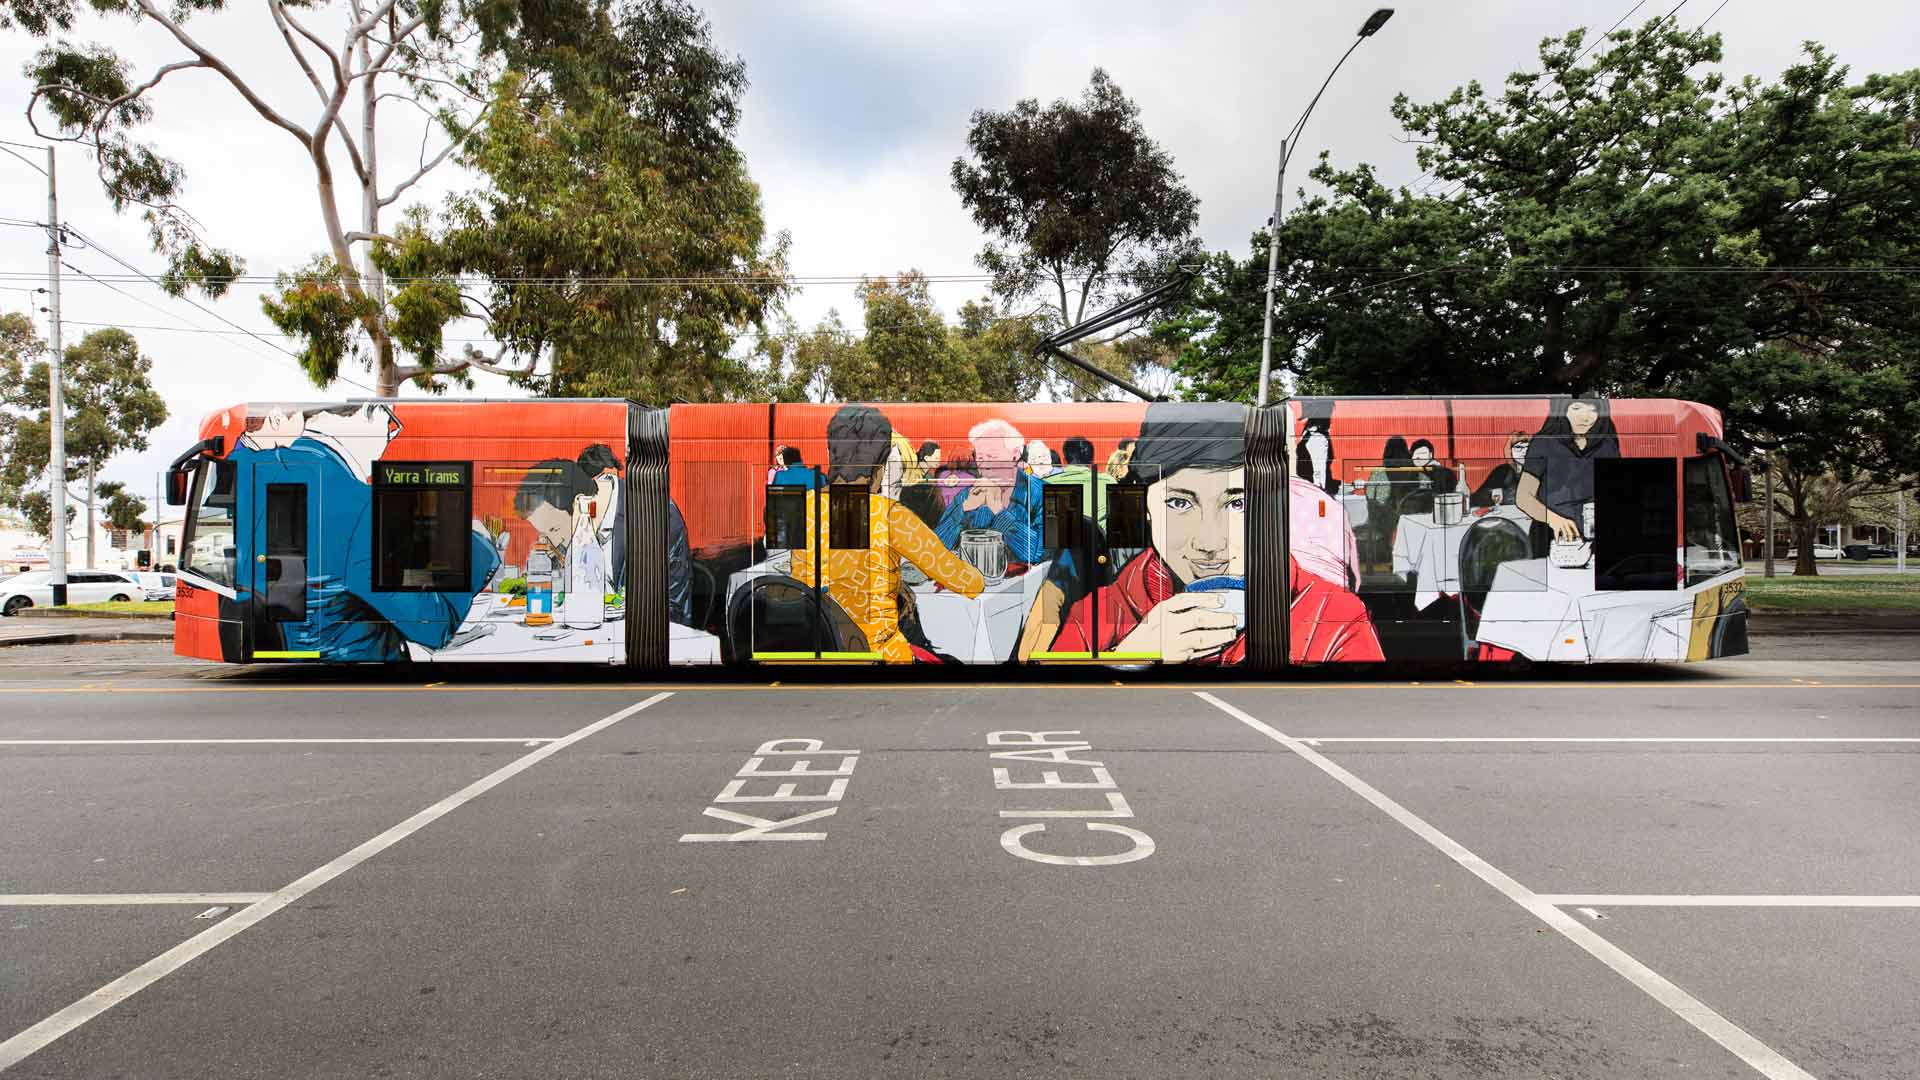 A Tram Covered with a Melbourne Twist on 'The Last Supper' Is Now Rolling Around the City